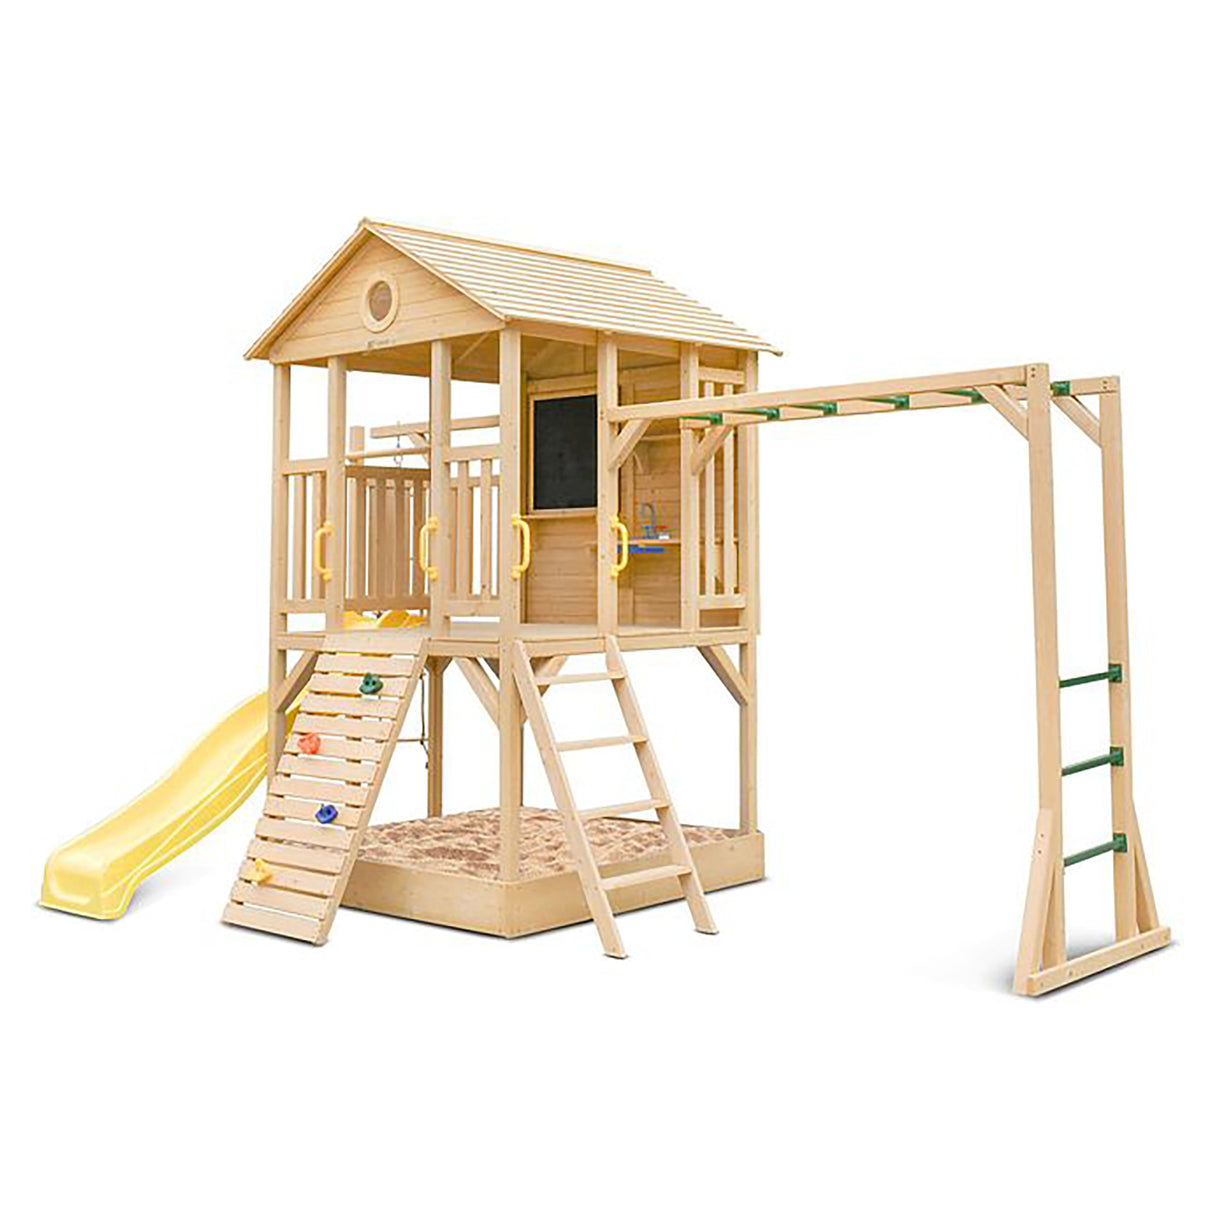 Lifespan Kids Kingston Cubby House with Slide, Yellow